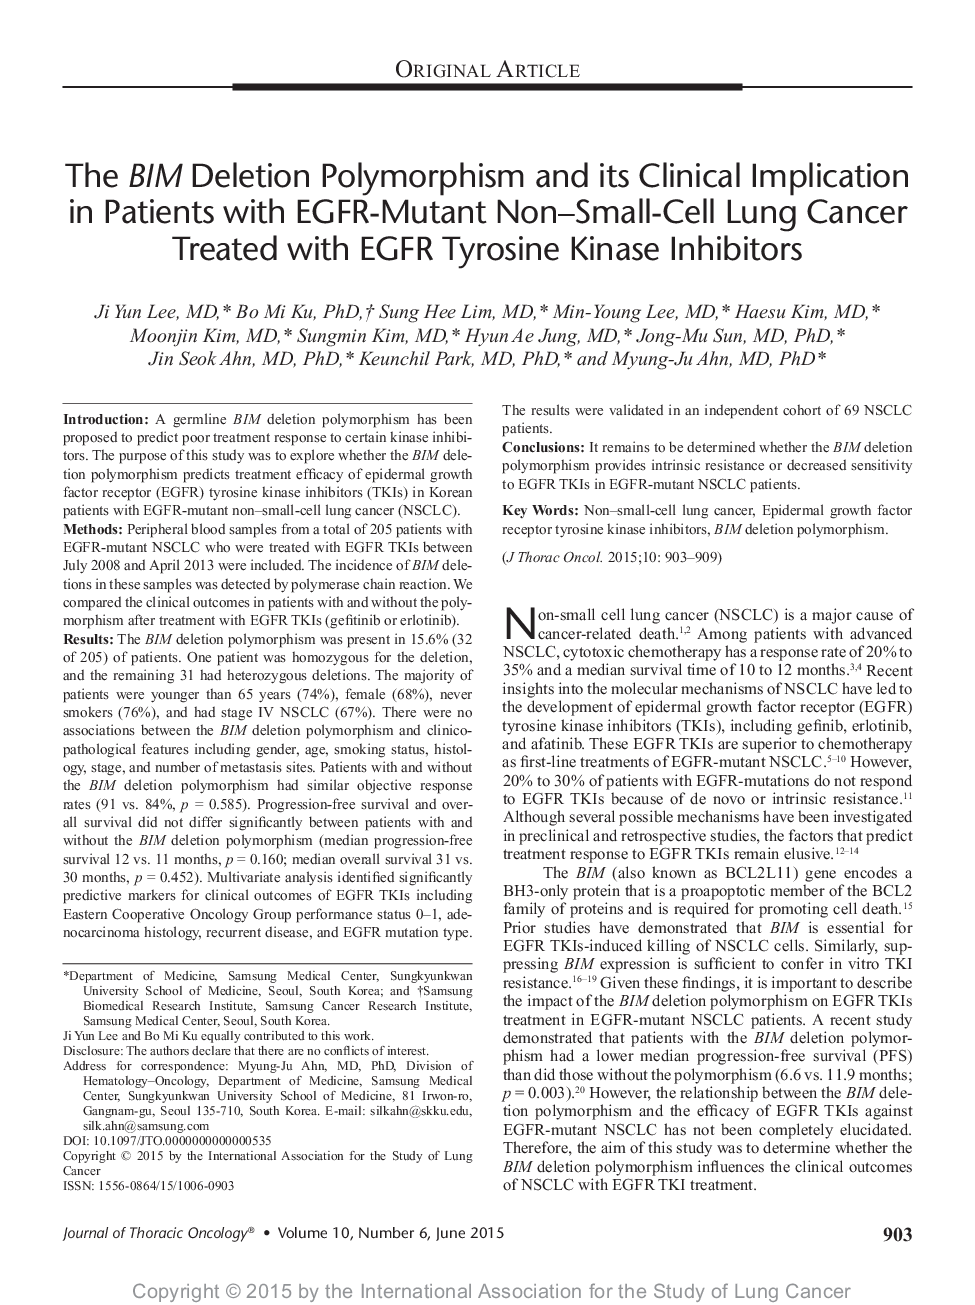 The BIM Deletion Polymorphism and its Clinical Implication in Patients with EGFR-Mutant Non-Small-Cell Lung Cancer Treated with EGFR Tyrosine Kinase Inhibitors